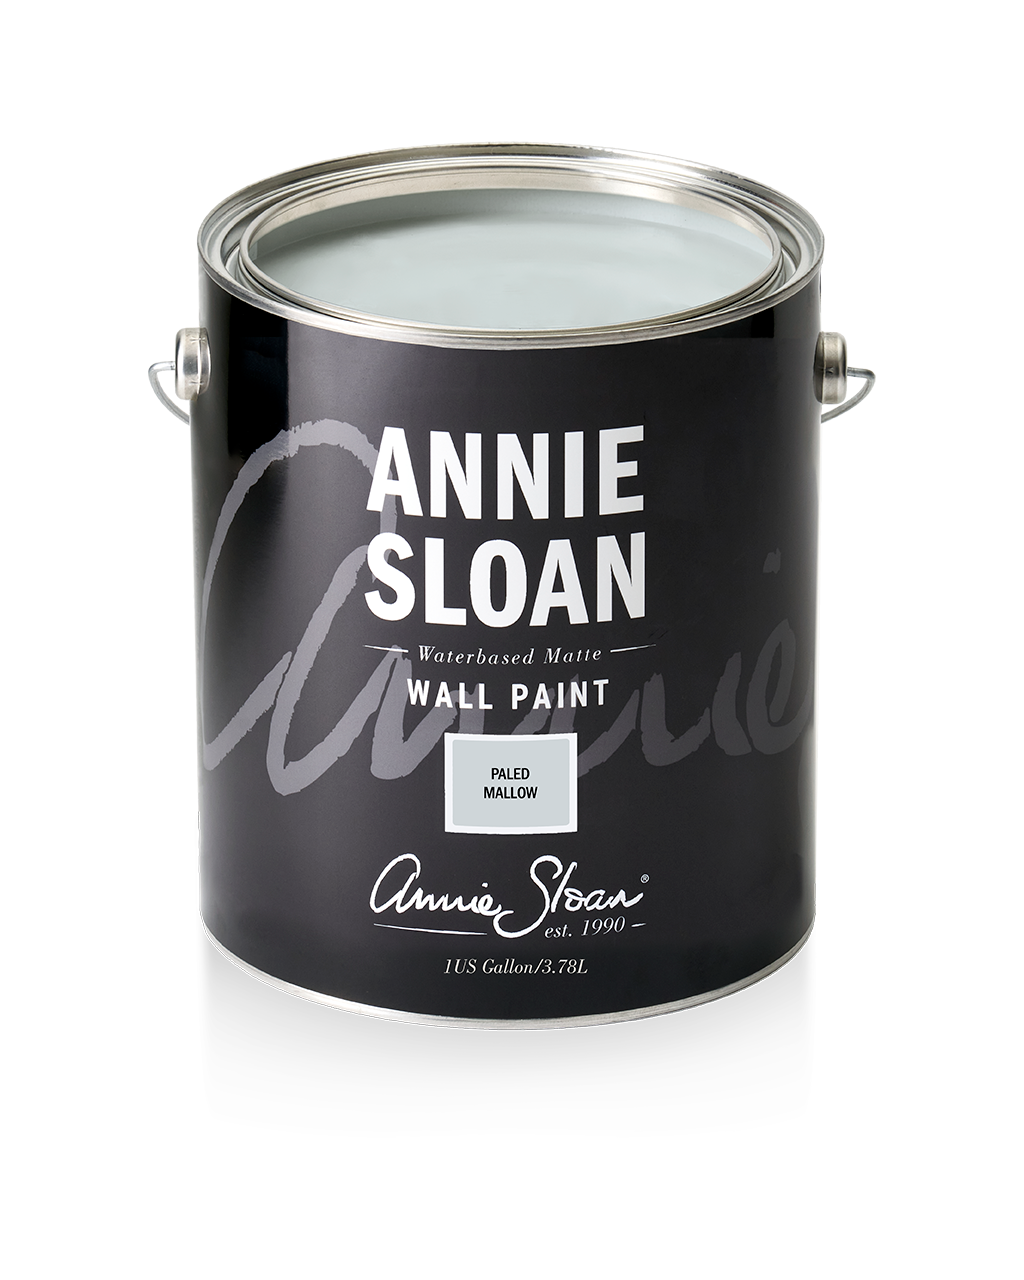 Annie Sloan Wall Paint Tin Paled Mallow